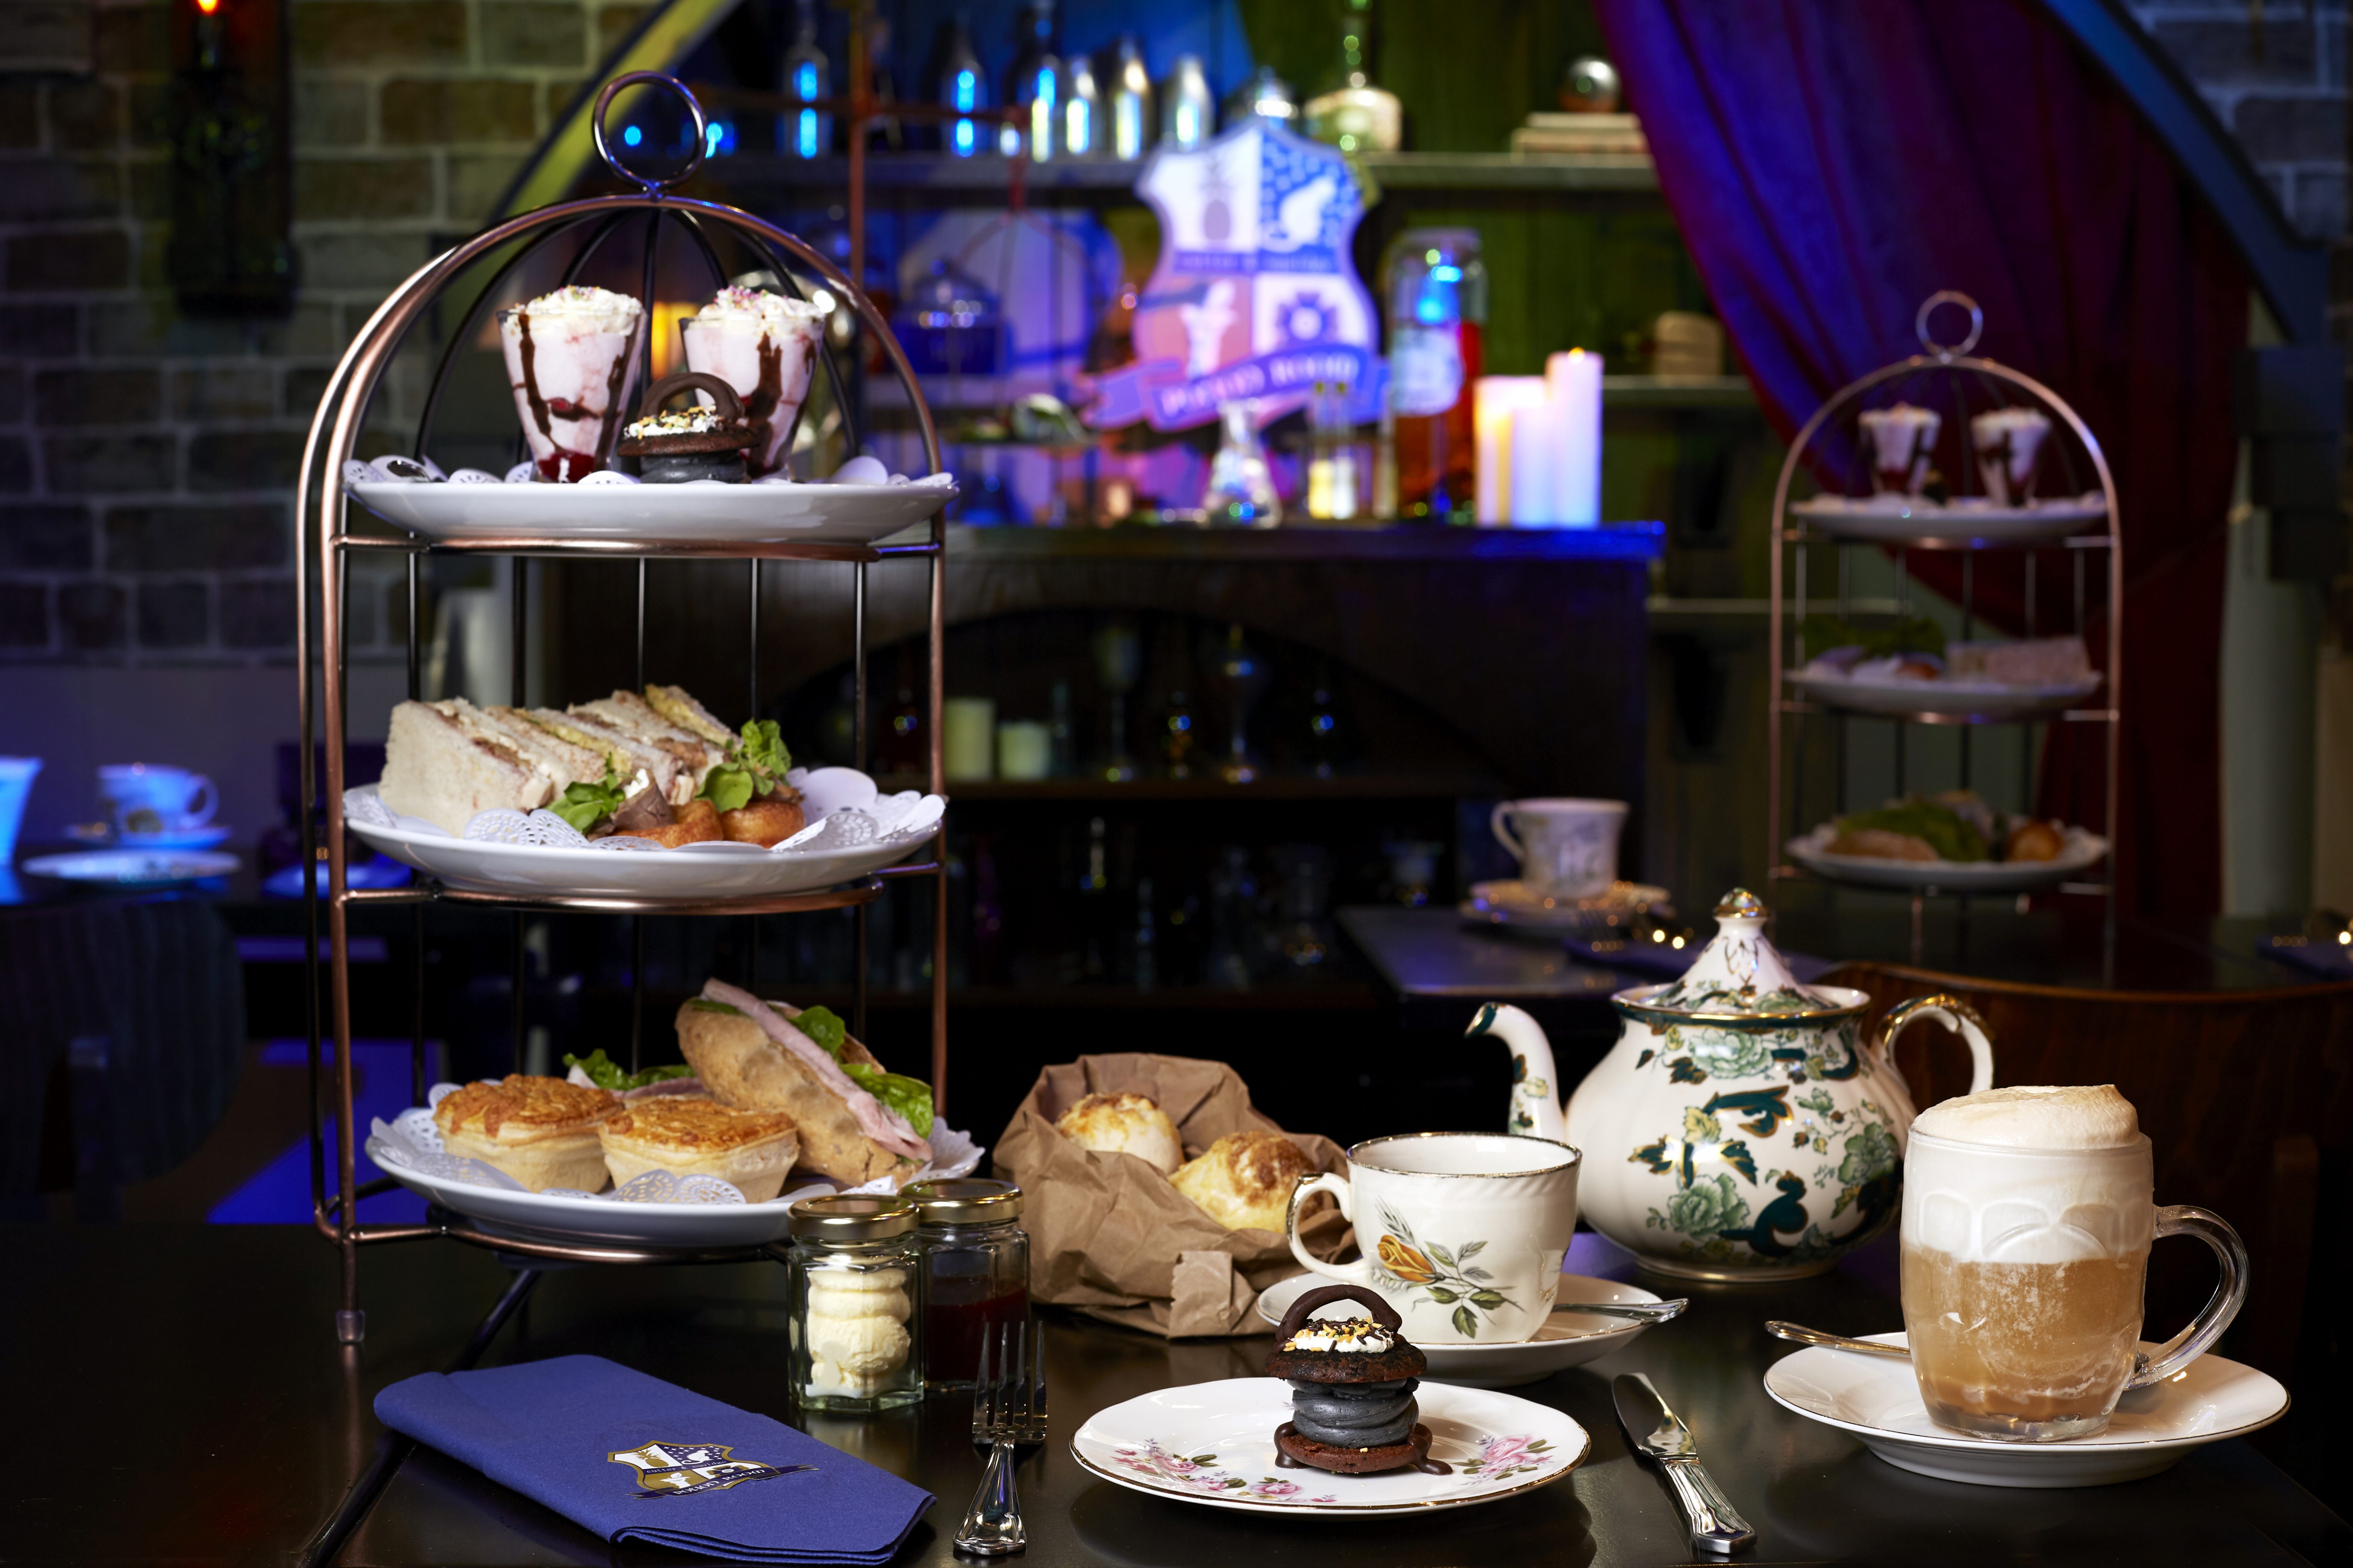 Cutter & Squidge Potion Room afternoon tea